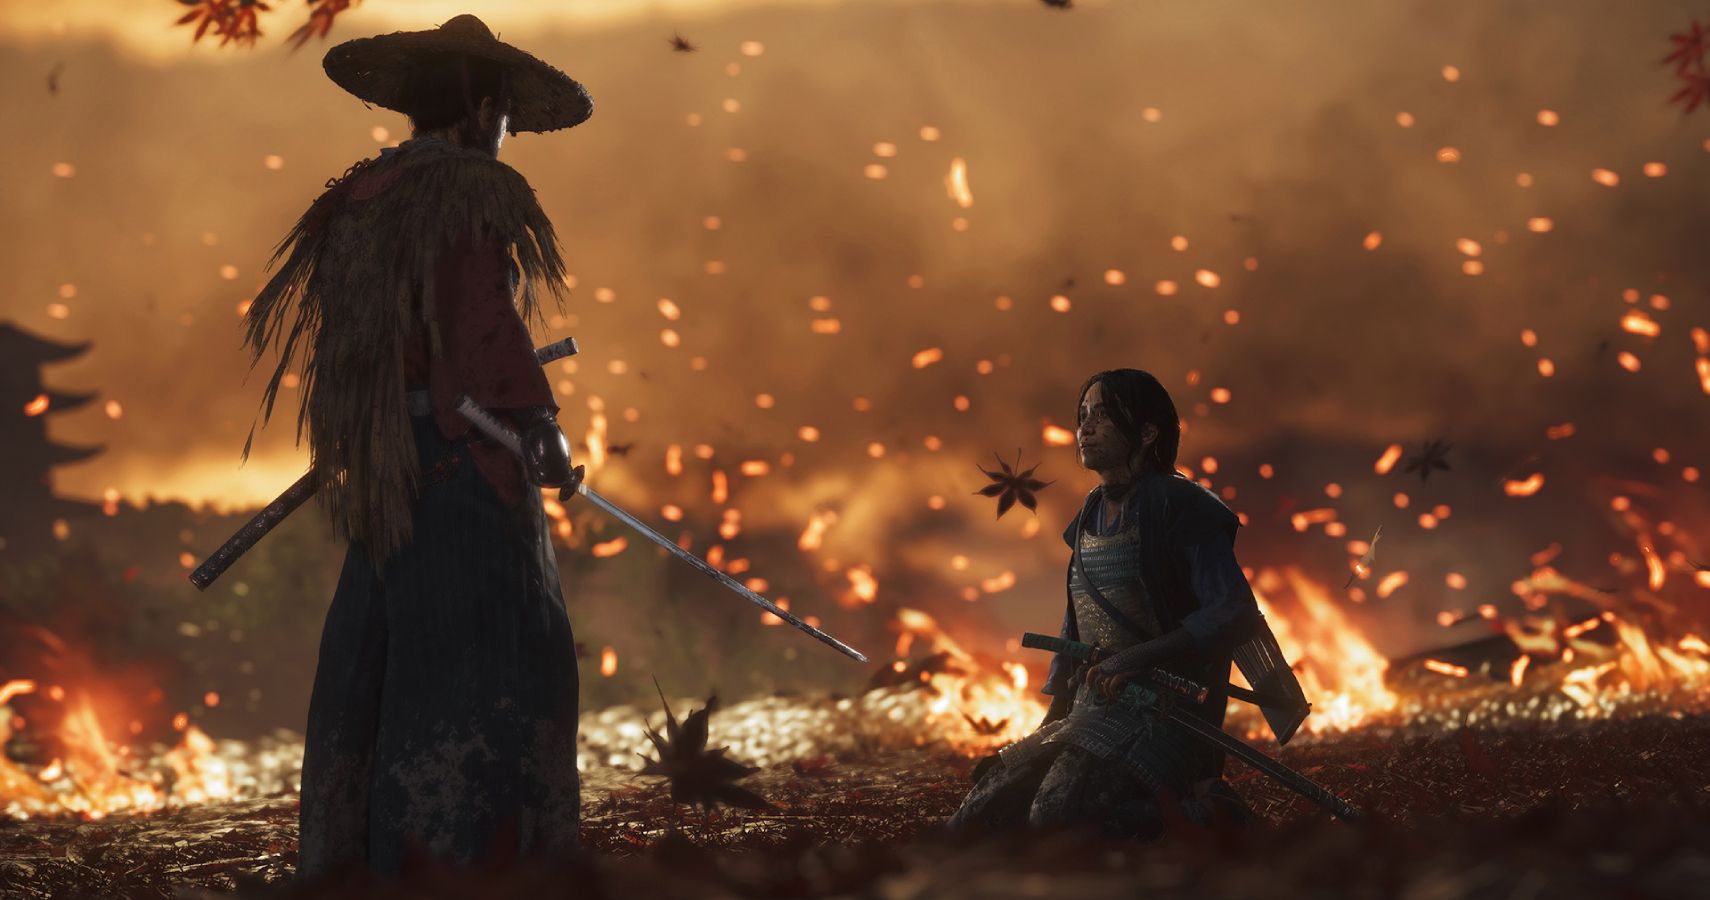 Why I Kind Of Love Ghost Of Tsushima's Press F To Pay Respects